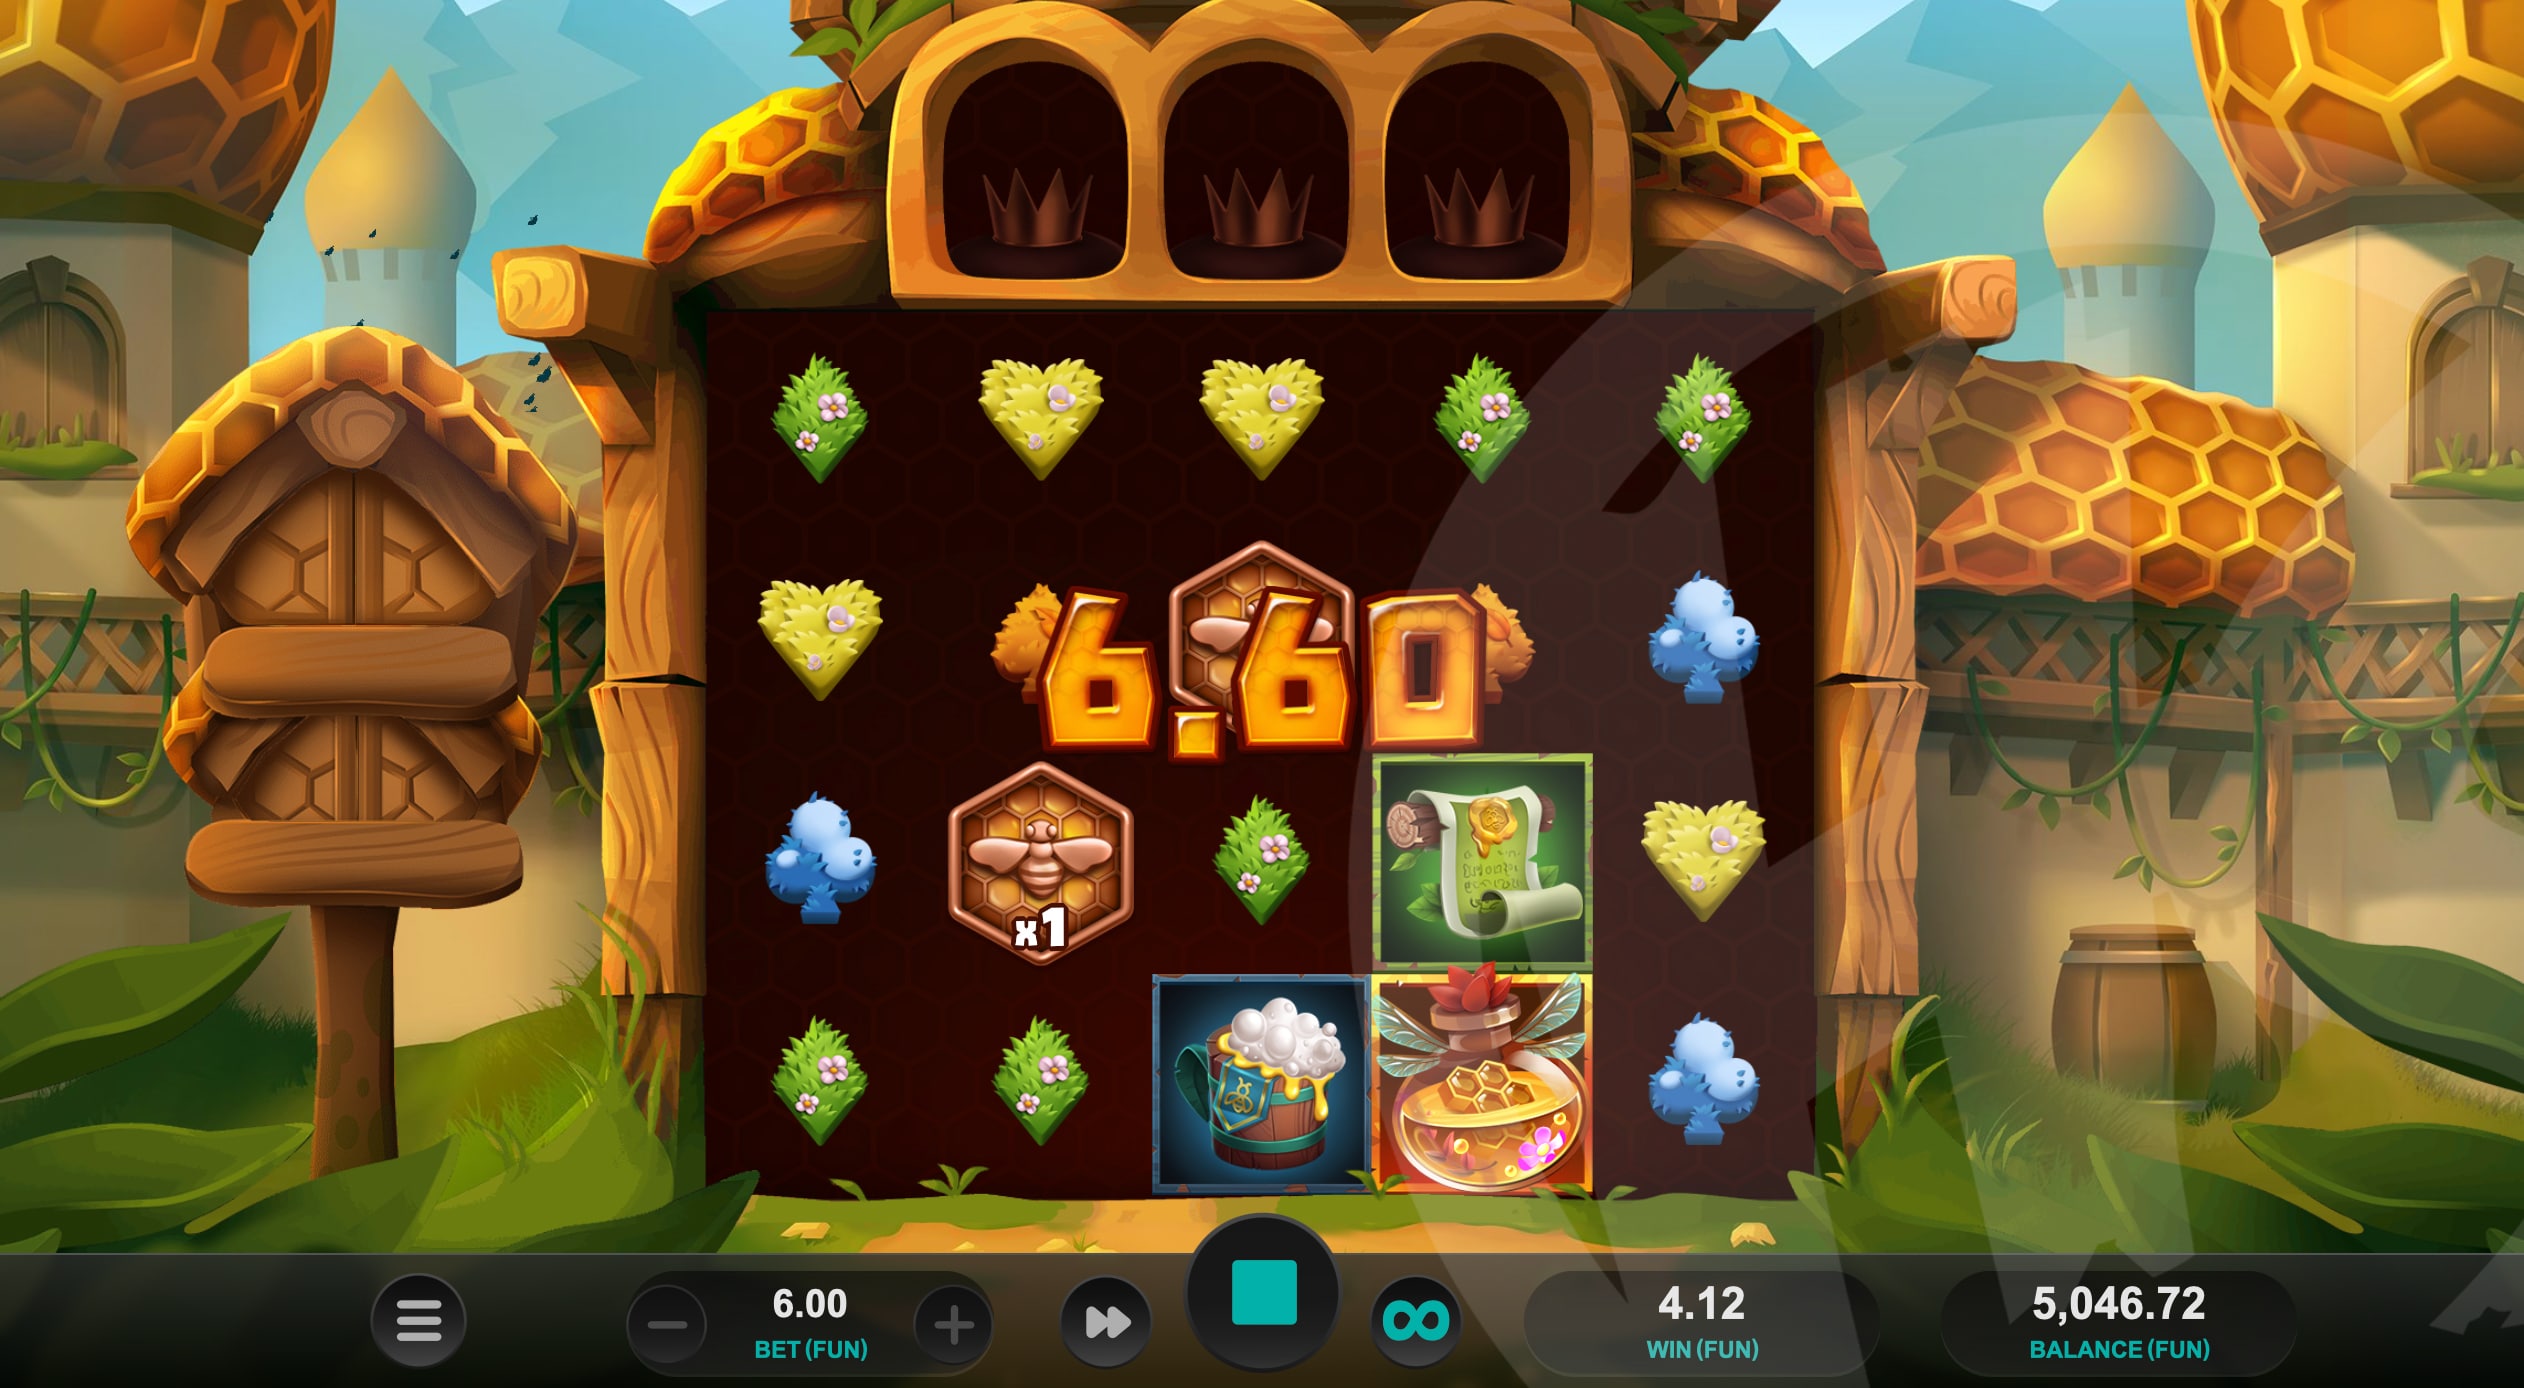 Beellionaires Dream Drop Offers Players 1,024 Ways to Win